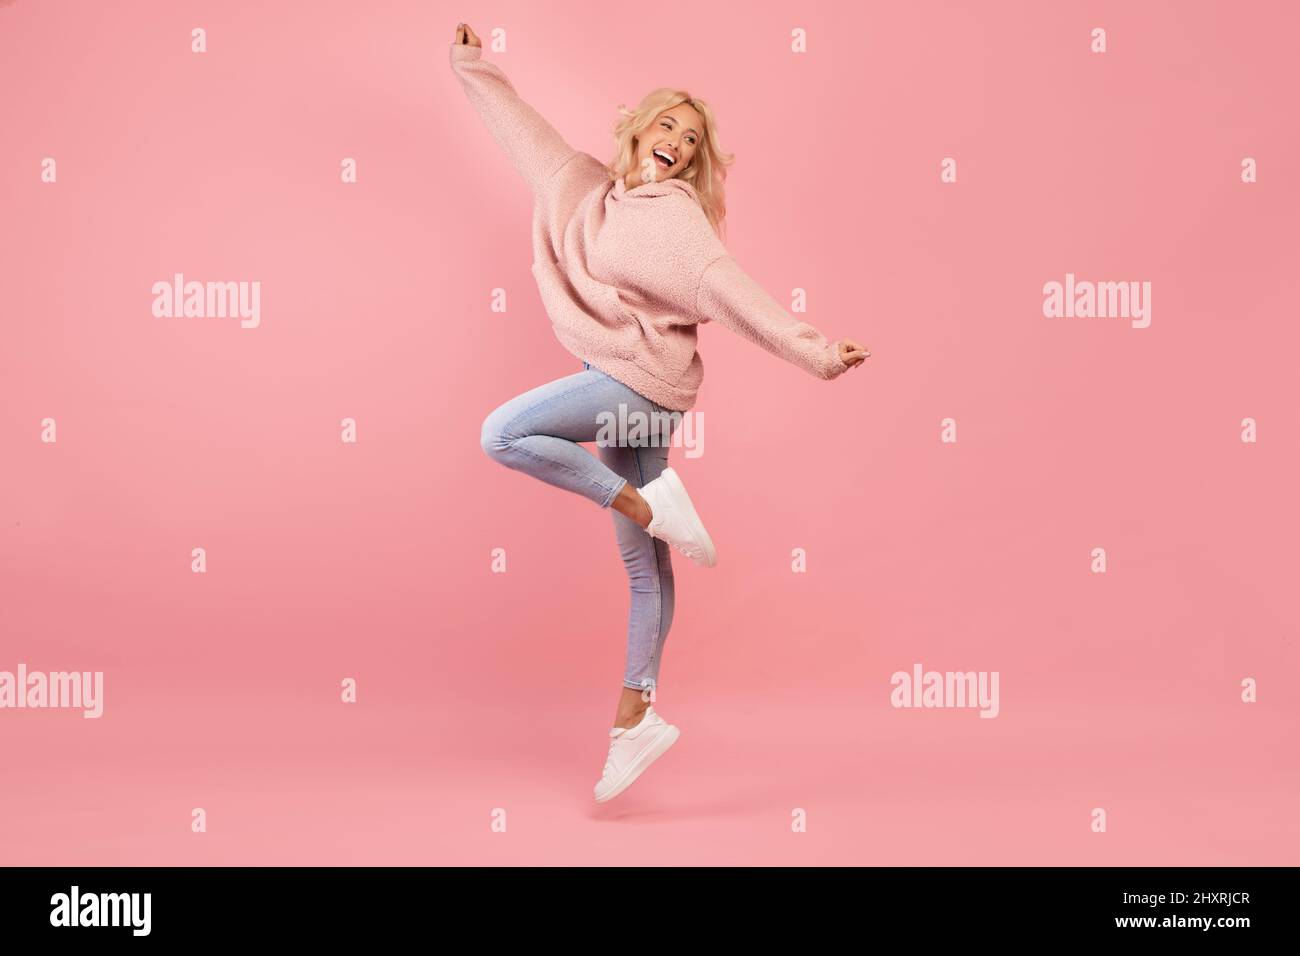 Joyful young lady jumping, having fun and smiling, being in good mood and fooling around over pink background Stock Photo